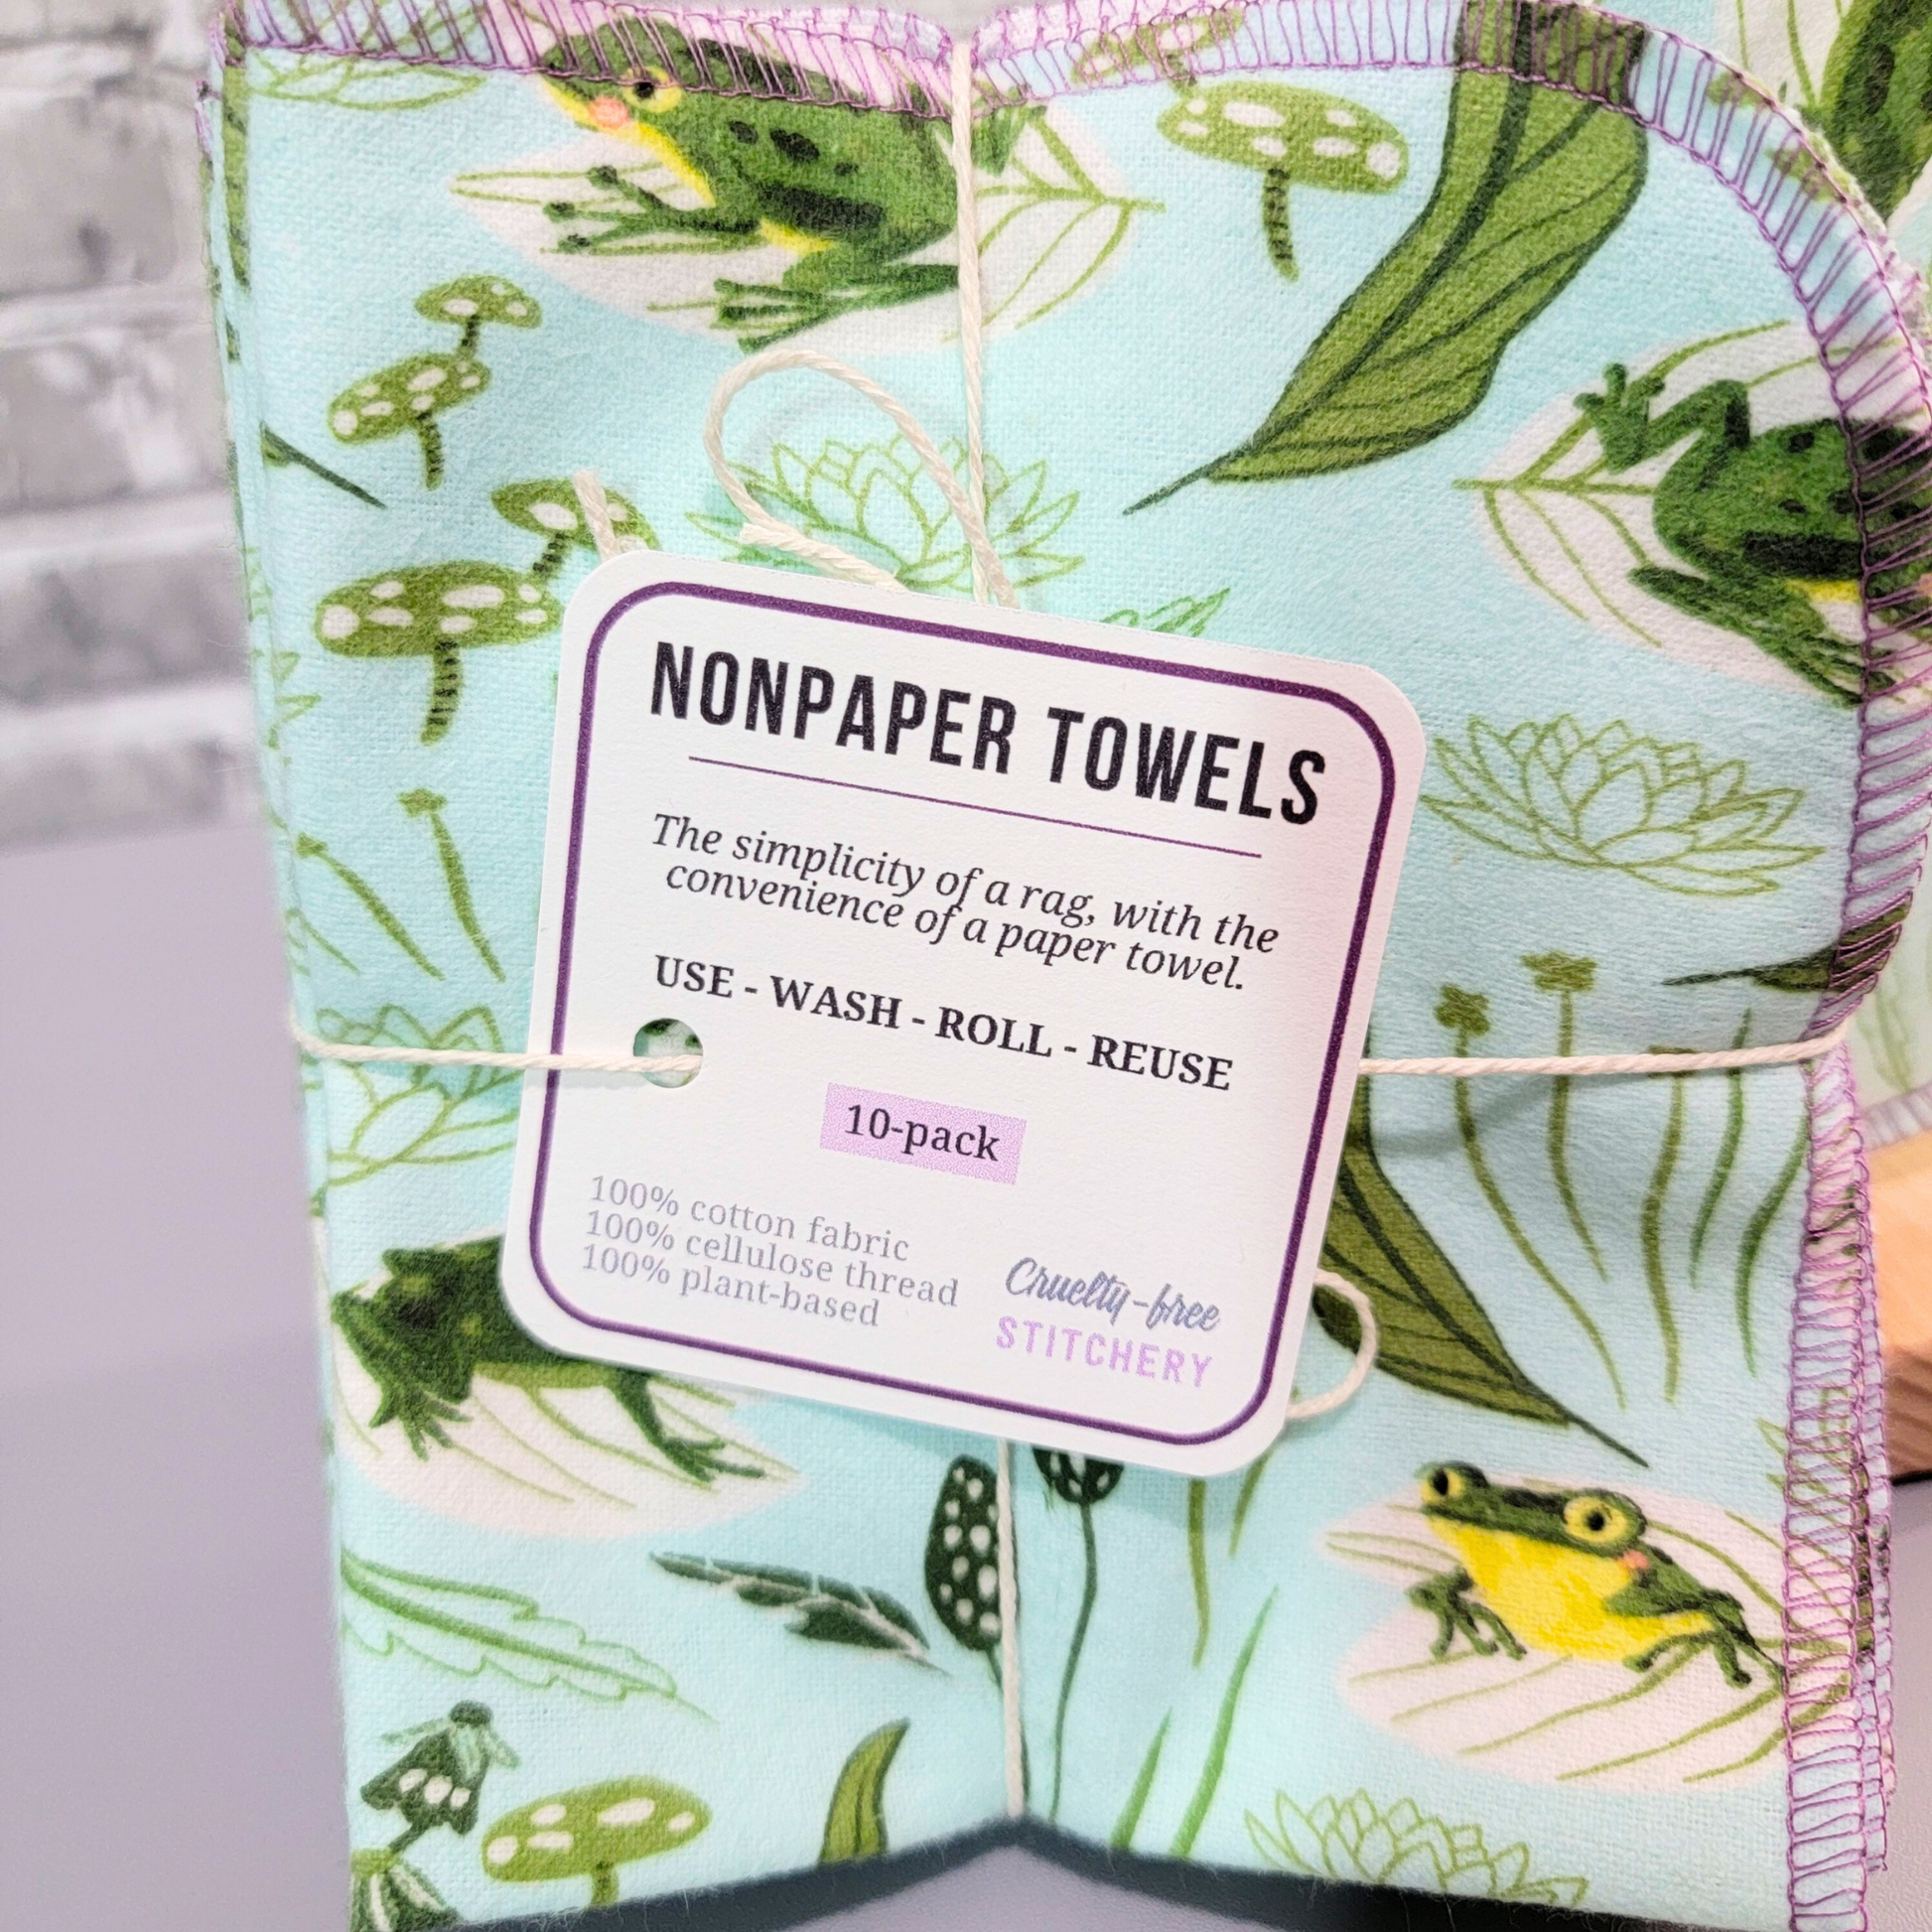 Close up of the NonPaper Towels tag. It says the simplicity of a rag with the convenience of a paper towel, use wash roll reuse, 10 pack, 100% cotton fabric, 100% cellulose thread, 100% plant based.